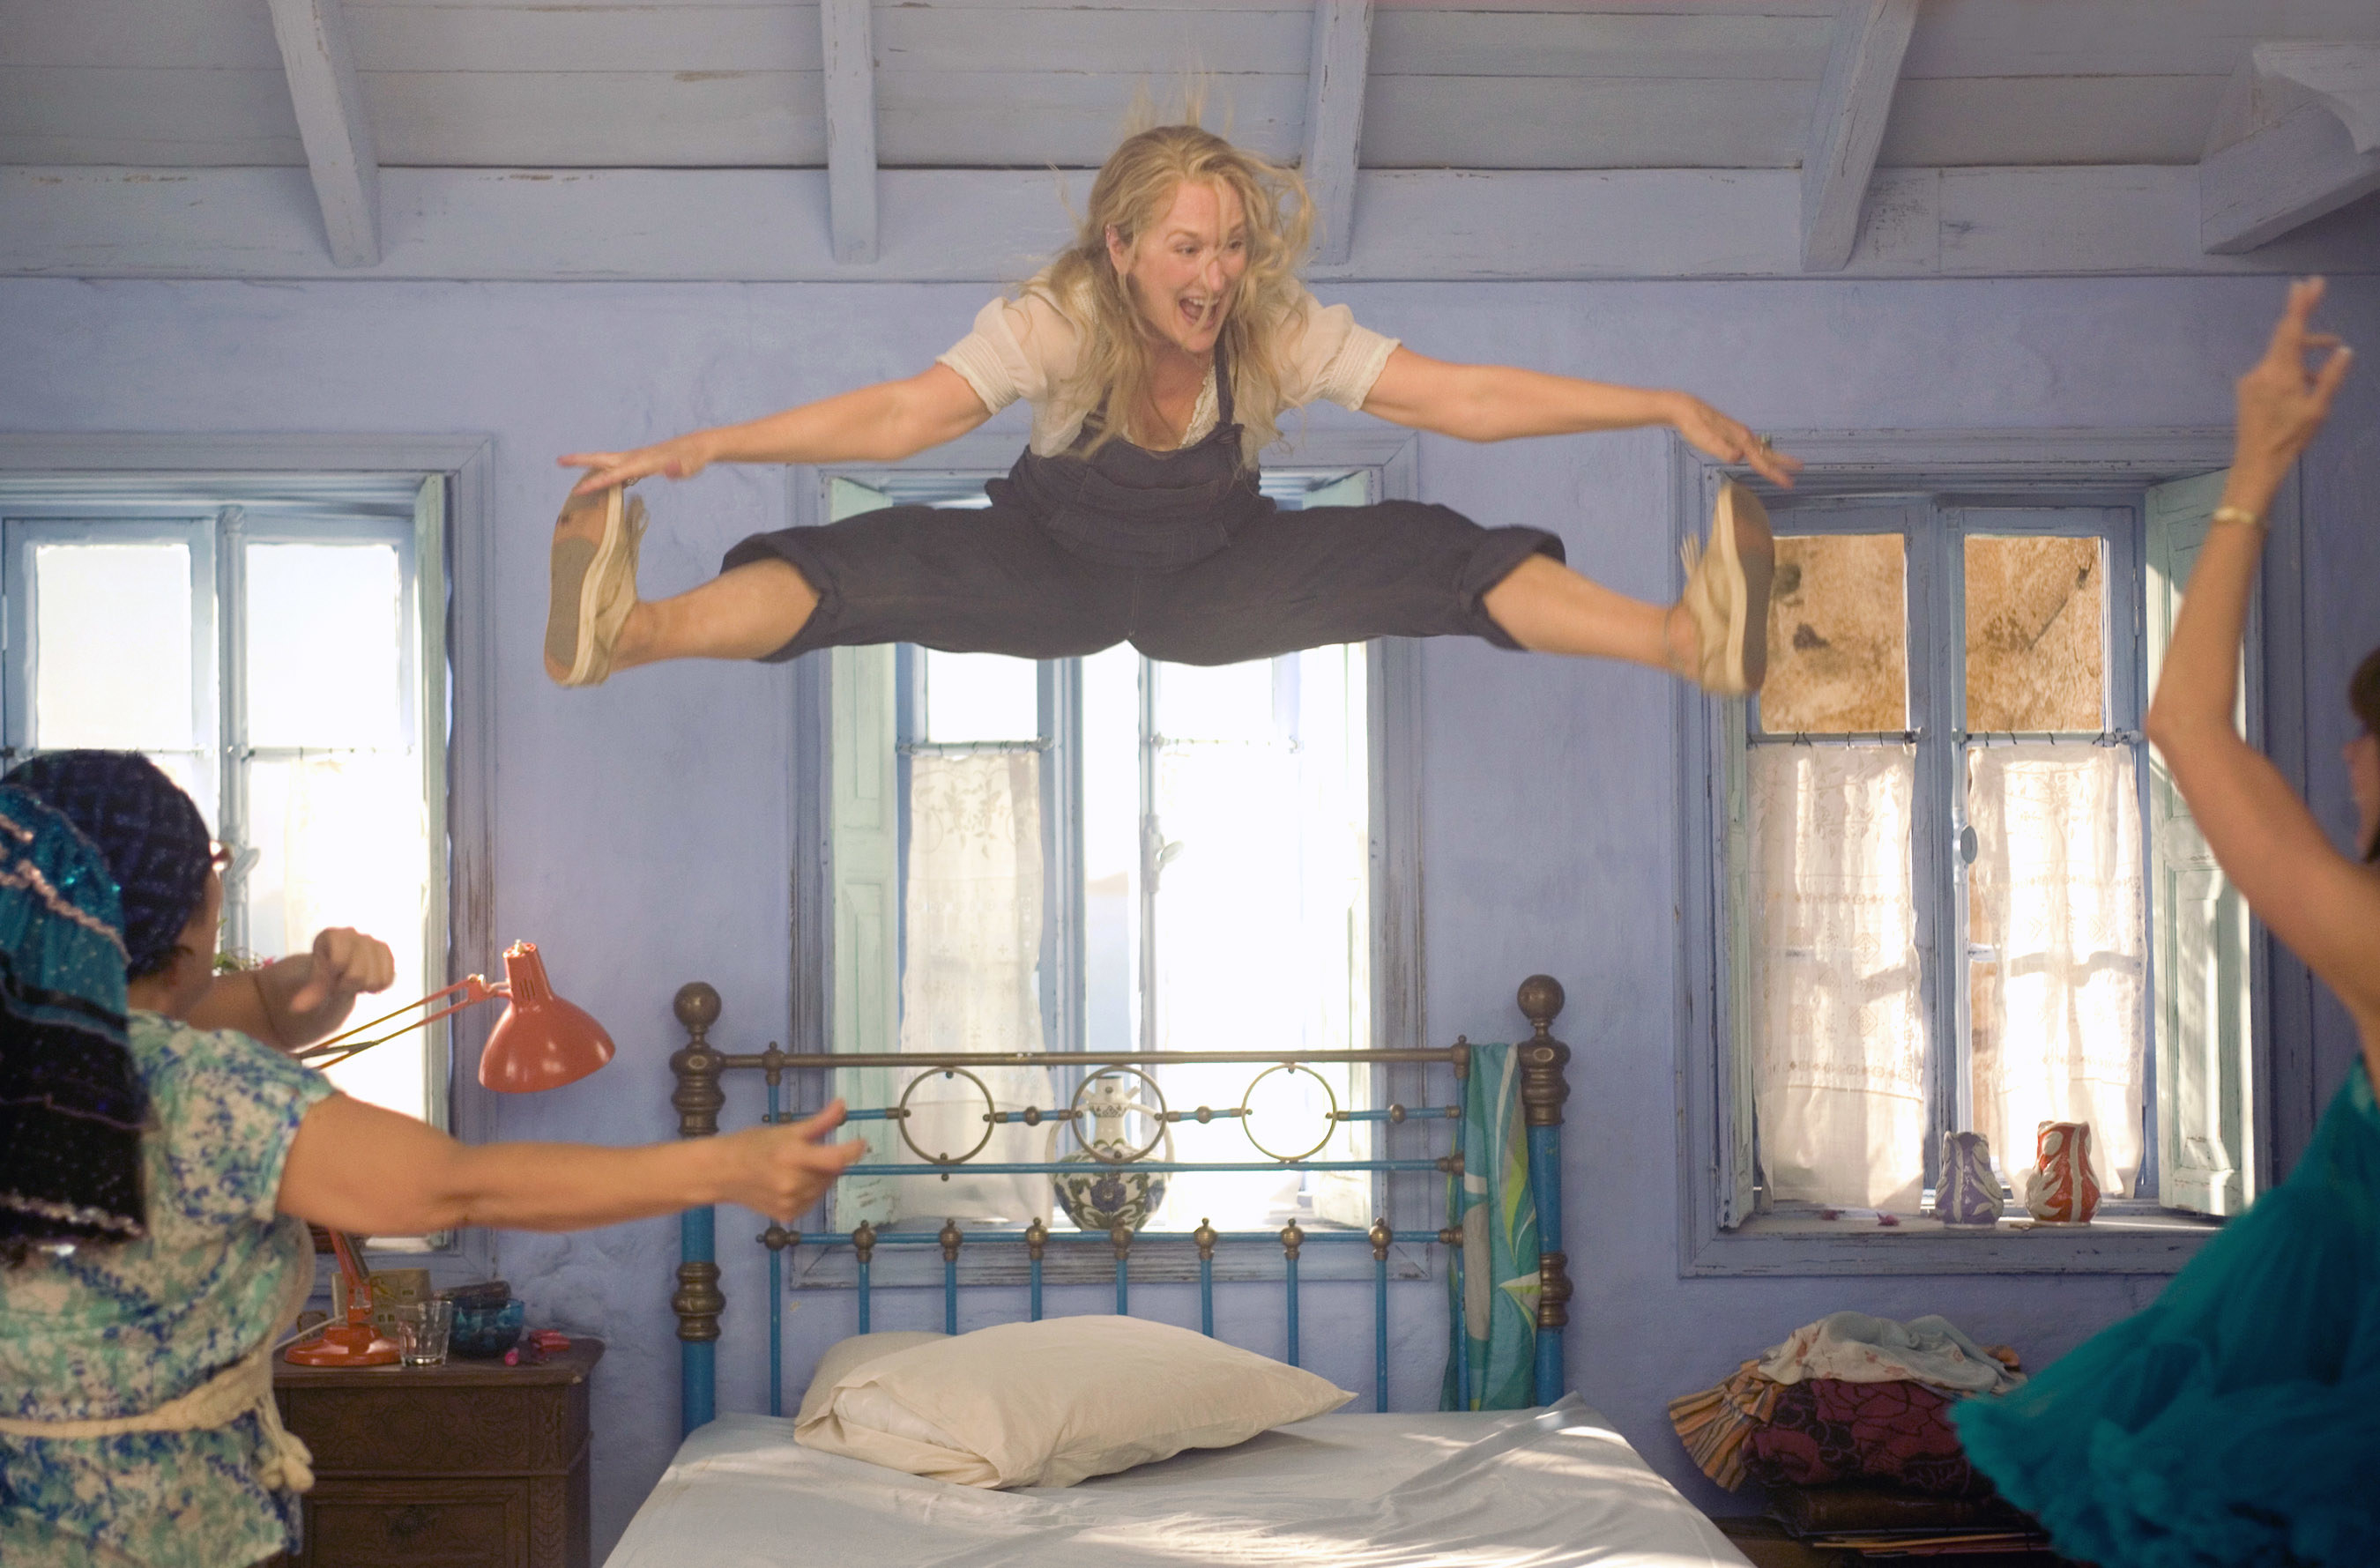 Meryl Streep jumping on the bed and doing a midair split in the first Mamma Mia movie